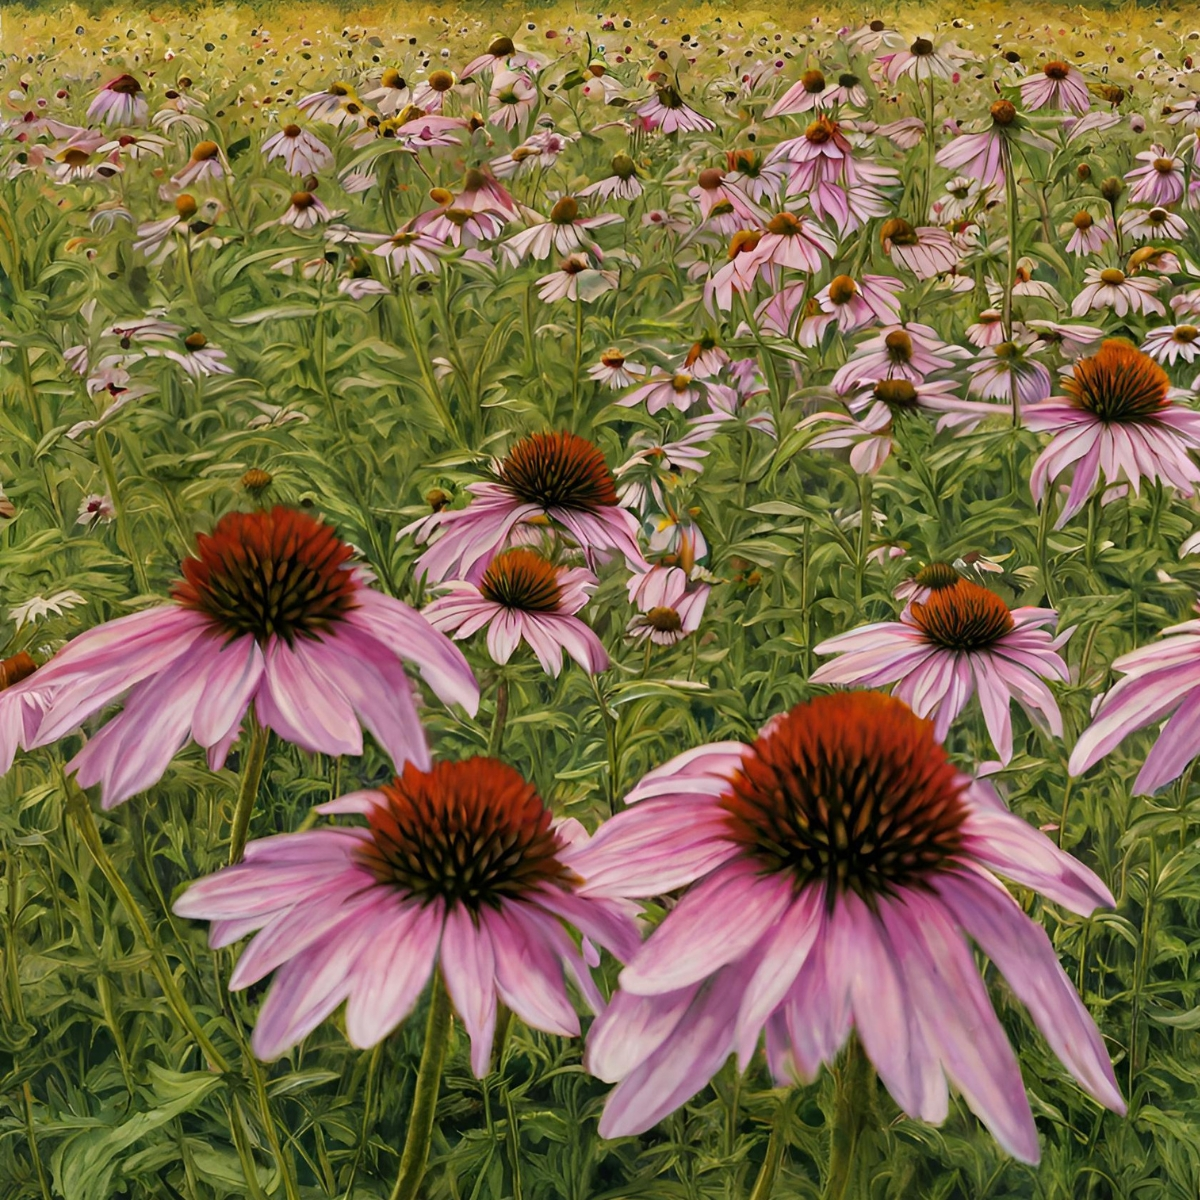 coneflowers delivered today, need for just 9.95, local florist provide, quality guarantee, beloved dad dear friend